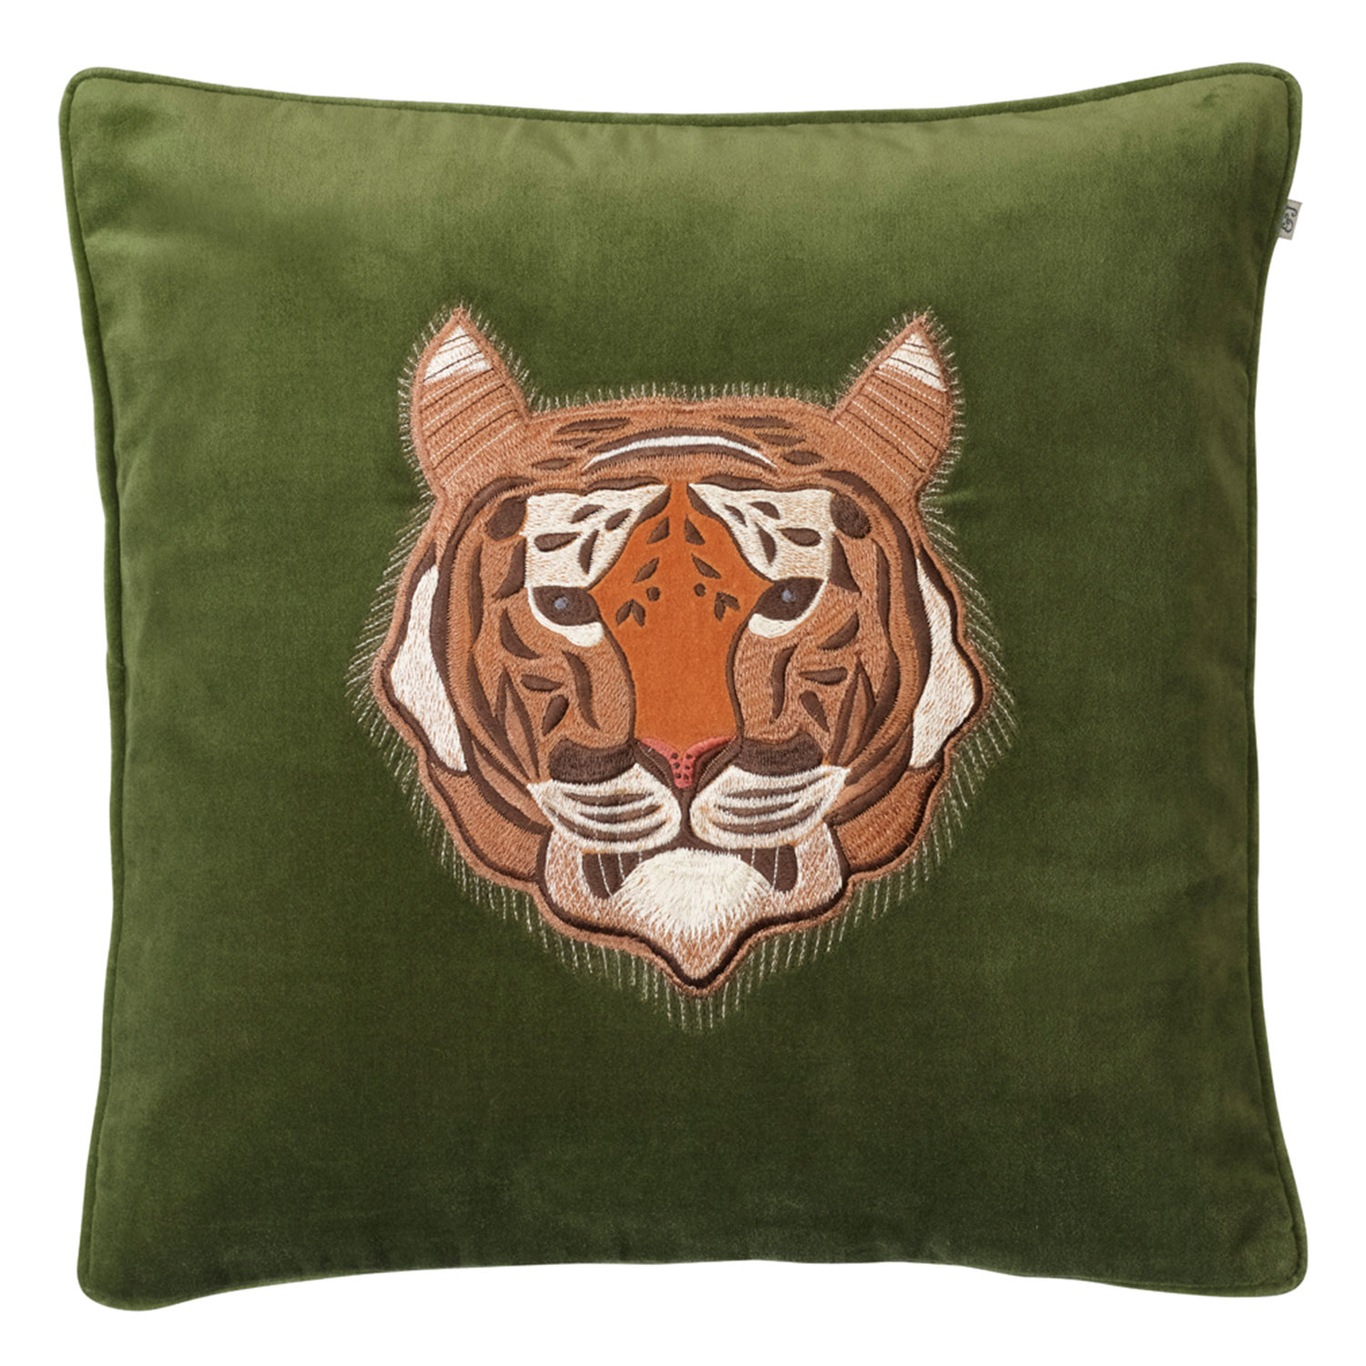 Embroid. Tiger Cushion Cover 50x50cm, Cactus Green